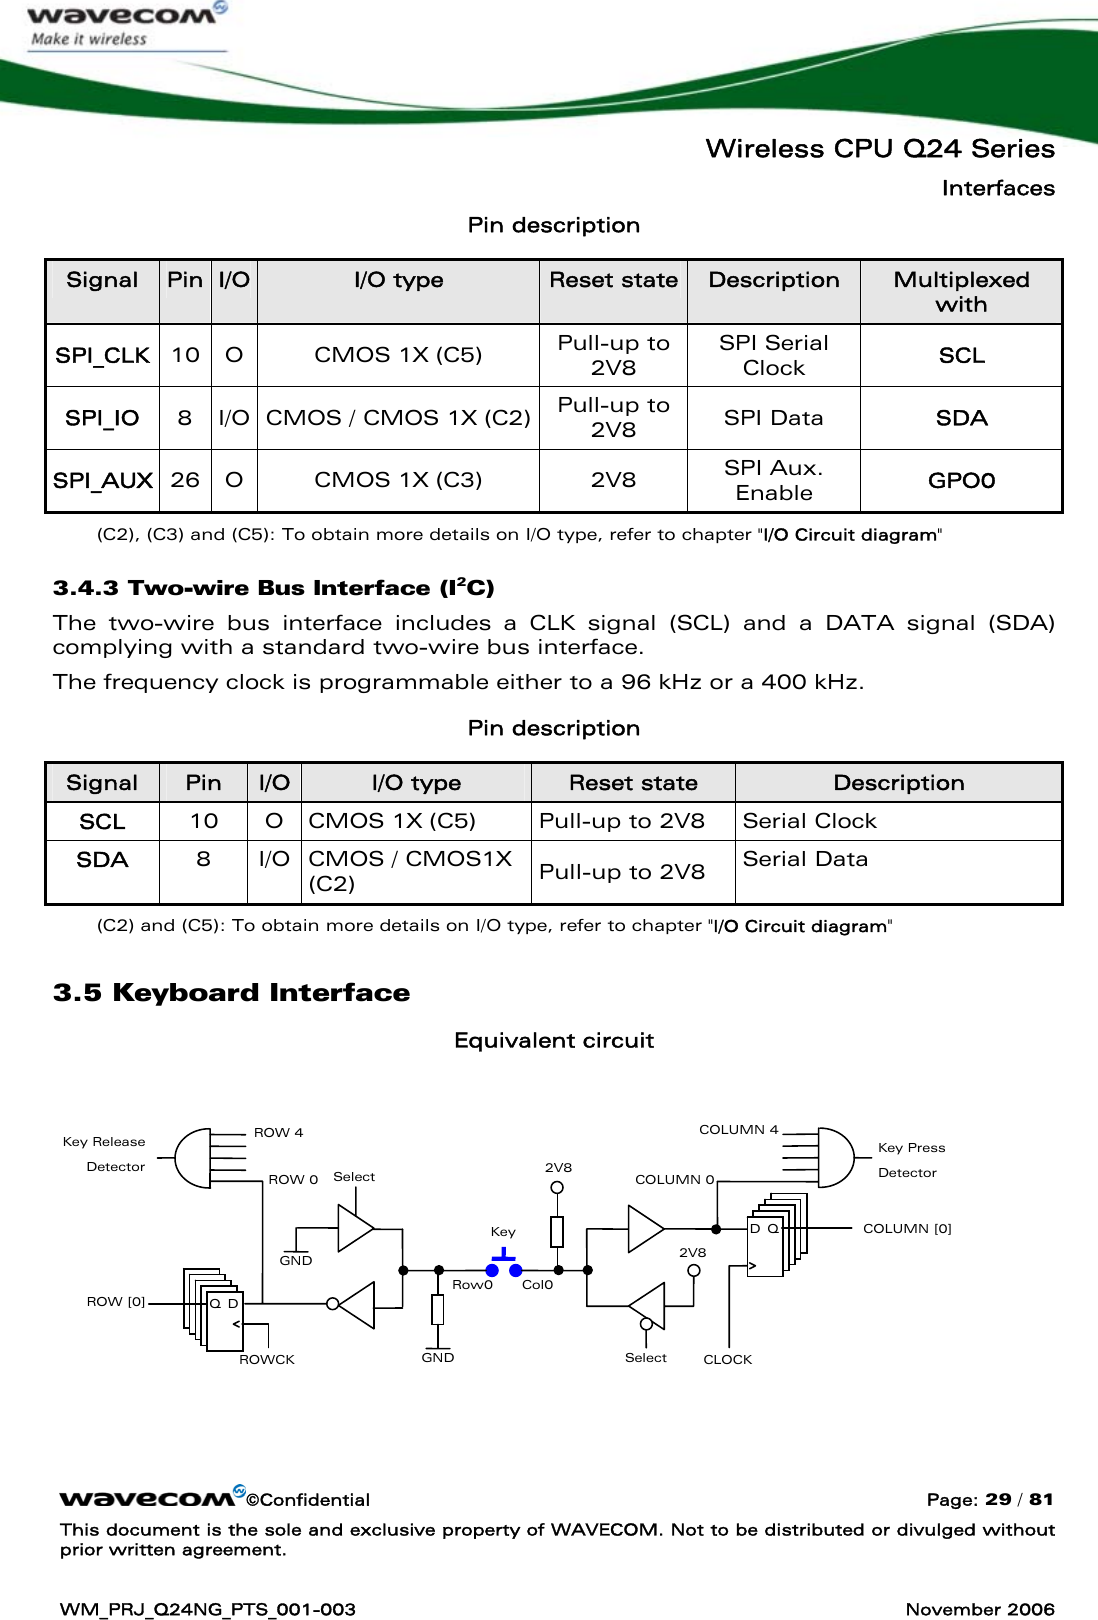   Wireless CPU Q24 Series Interfaces ©Confidential  Page: 29 / 81 This document is the sole and exclusive property of WAVECOM. Not to be distributed or divulged without prior written agreement.  WM_PRJ_Q24NG_PTS_001-003  November 2006  Pin description Signal  Pin  I/O  I/O type  Reset state Description  Multiplexed with SPI_CLK  10  O  CMOS 1X (C5)  Pull-up to 2V8 SPI Serial Clock  SCL SPI_IO  8  I/O  CMOS / CMOS 1X (C2) Pull-up to 2V8  SPI Data  SDA SPI_AUX  26  O  CMOS 1X (C3)  2V8  SPI Aux. Enable  GPO0 (C2), (C3) and (C5): To obtain more details on I/O type, refer to chapter &quot;I/O Circuit diagram&quot; 3.4.3 Two-wire Bus Interface (I2C) The two-wire bus interface includes a CLK signal (SCL) and a DATA signal (SDA) complying with a standard two-wire bus interface. The frequency clock is programmable either to a 96 kHz or a 400 kHz. Pin description Signal  Pin  I/O  I/O type  Reset state  Description SCL  10  O  CMOS 1X (C5)  Pull-up to 2V8  Serial Clock SDA  8  I/O  CMOS / CMOS1X (C2)  Pull-up to 2V8  Serial Data (C2) and (C5): To obtain more details on I/O type, refer to chapter &quot;I/O Circuit diagram&quot; 3.5 Keyboard Interface Equivalent circuit   Key 2V8 GND 2V8 Key Press Detector Row0 Col0 D Q COLUMN 0 COLUMN 4 CLOCK GND COLUMN [0] Key Release Detector Q D ROW 0 ROW 4 ROWCK ROW [0] Select Select 